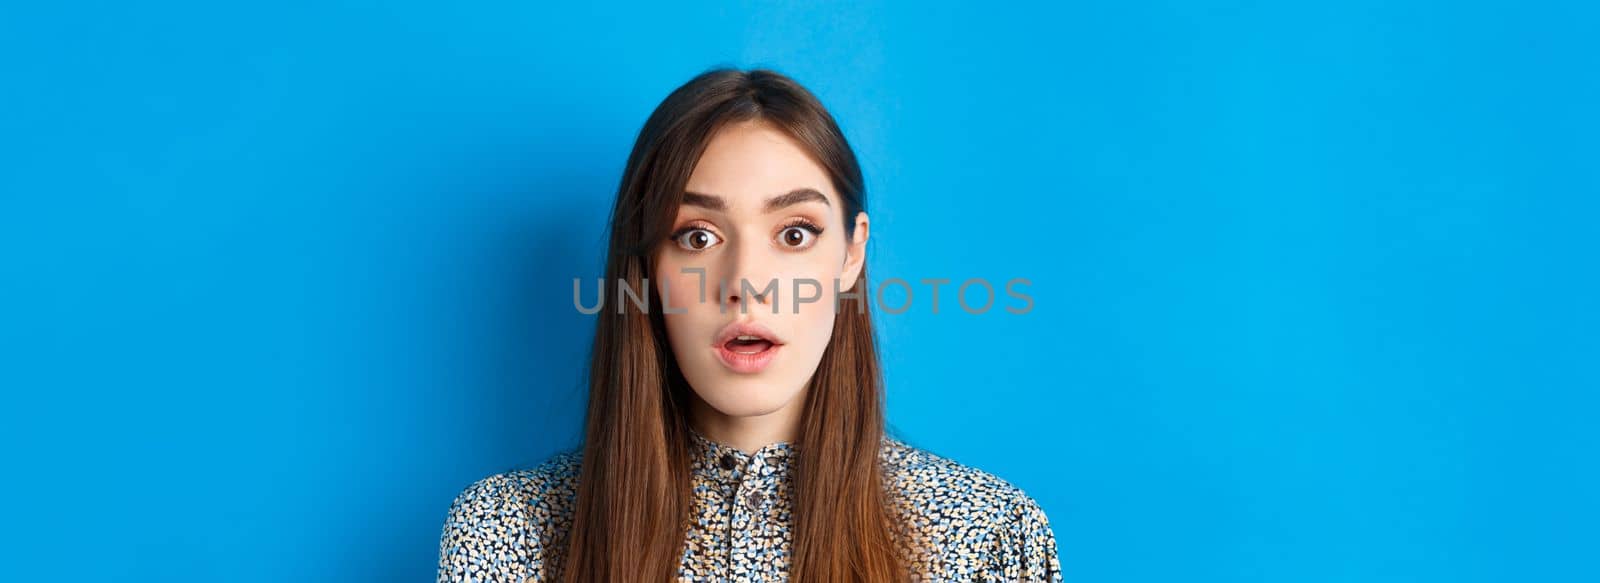 Close-up of excited pretty woman with long natural hair and makeup, drop jaw and gasping surprised, checking out awesome promo, hear amazing news, blue background.